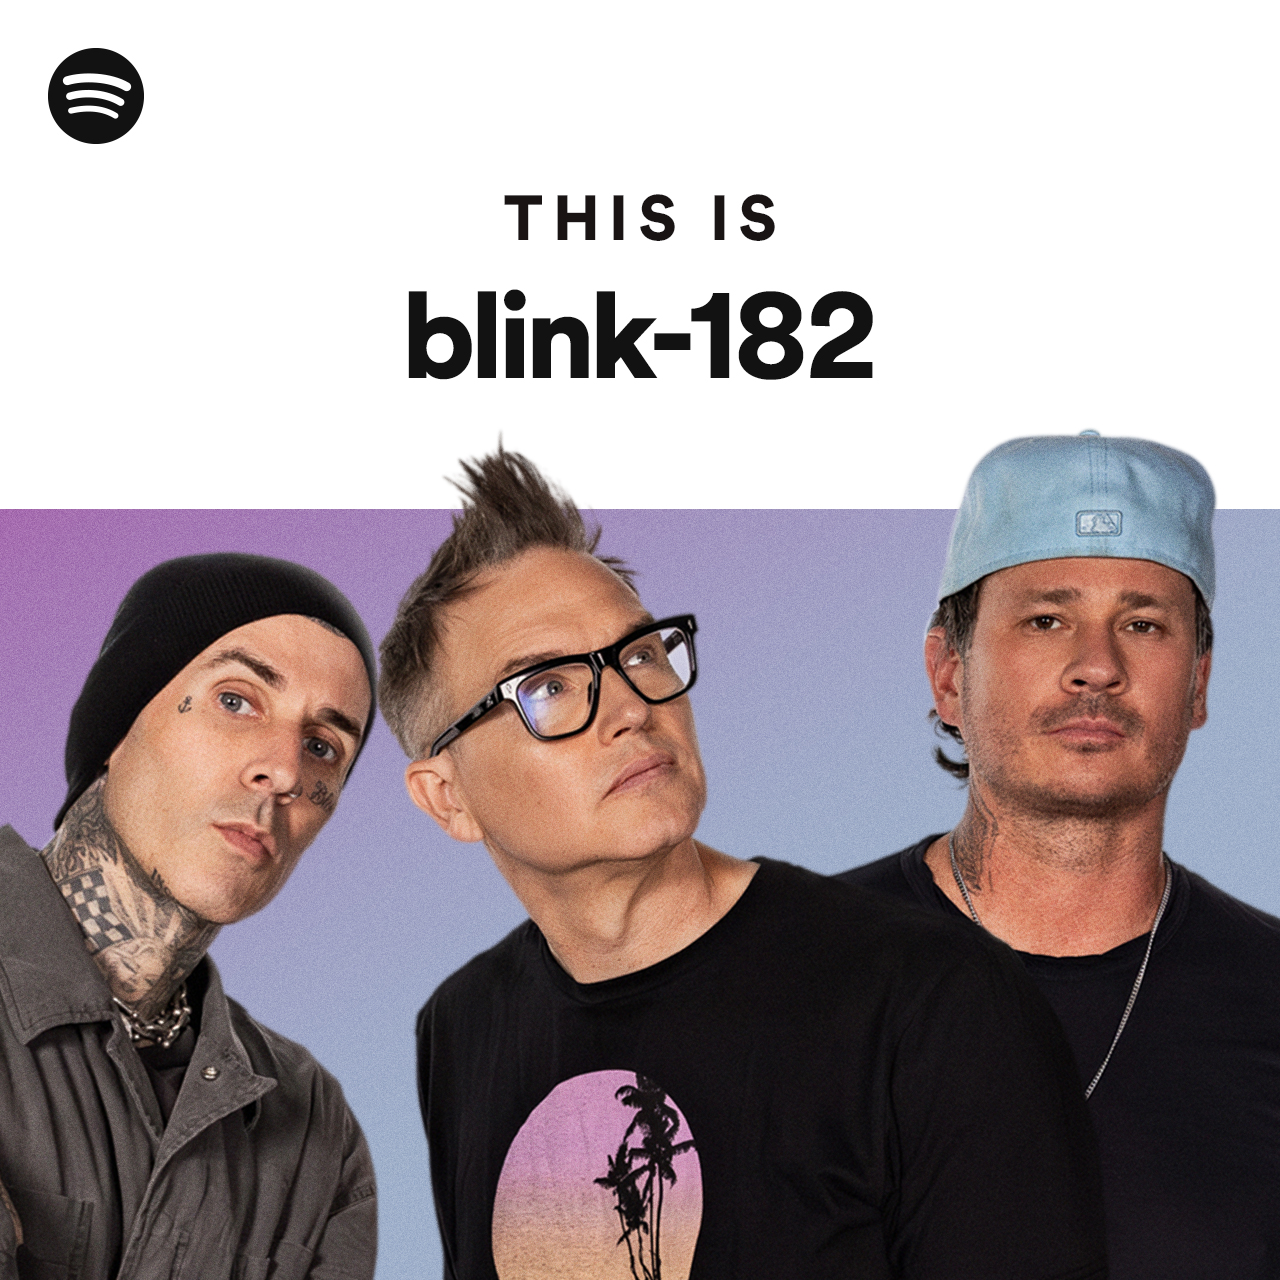 This Is blink-182